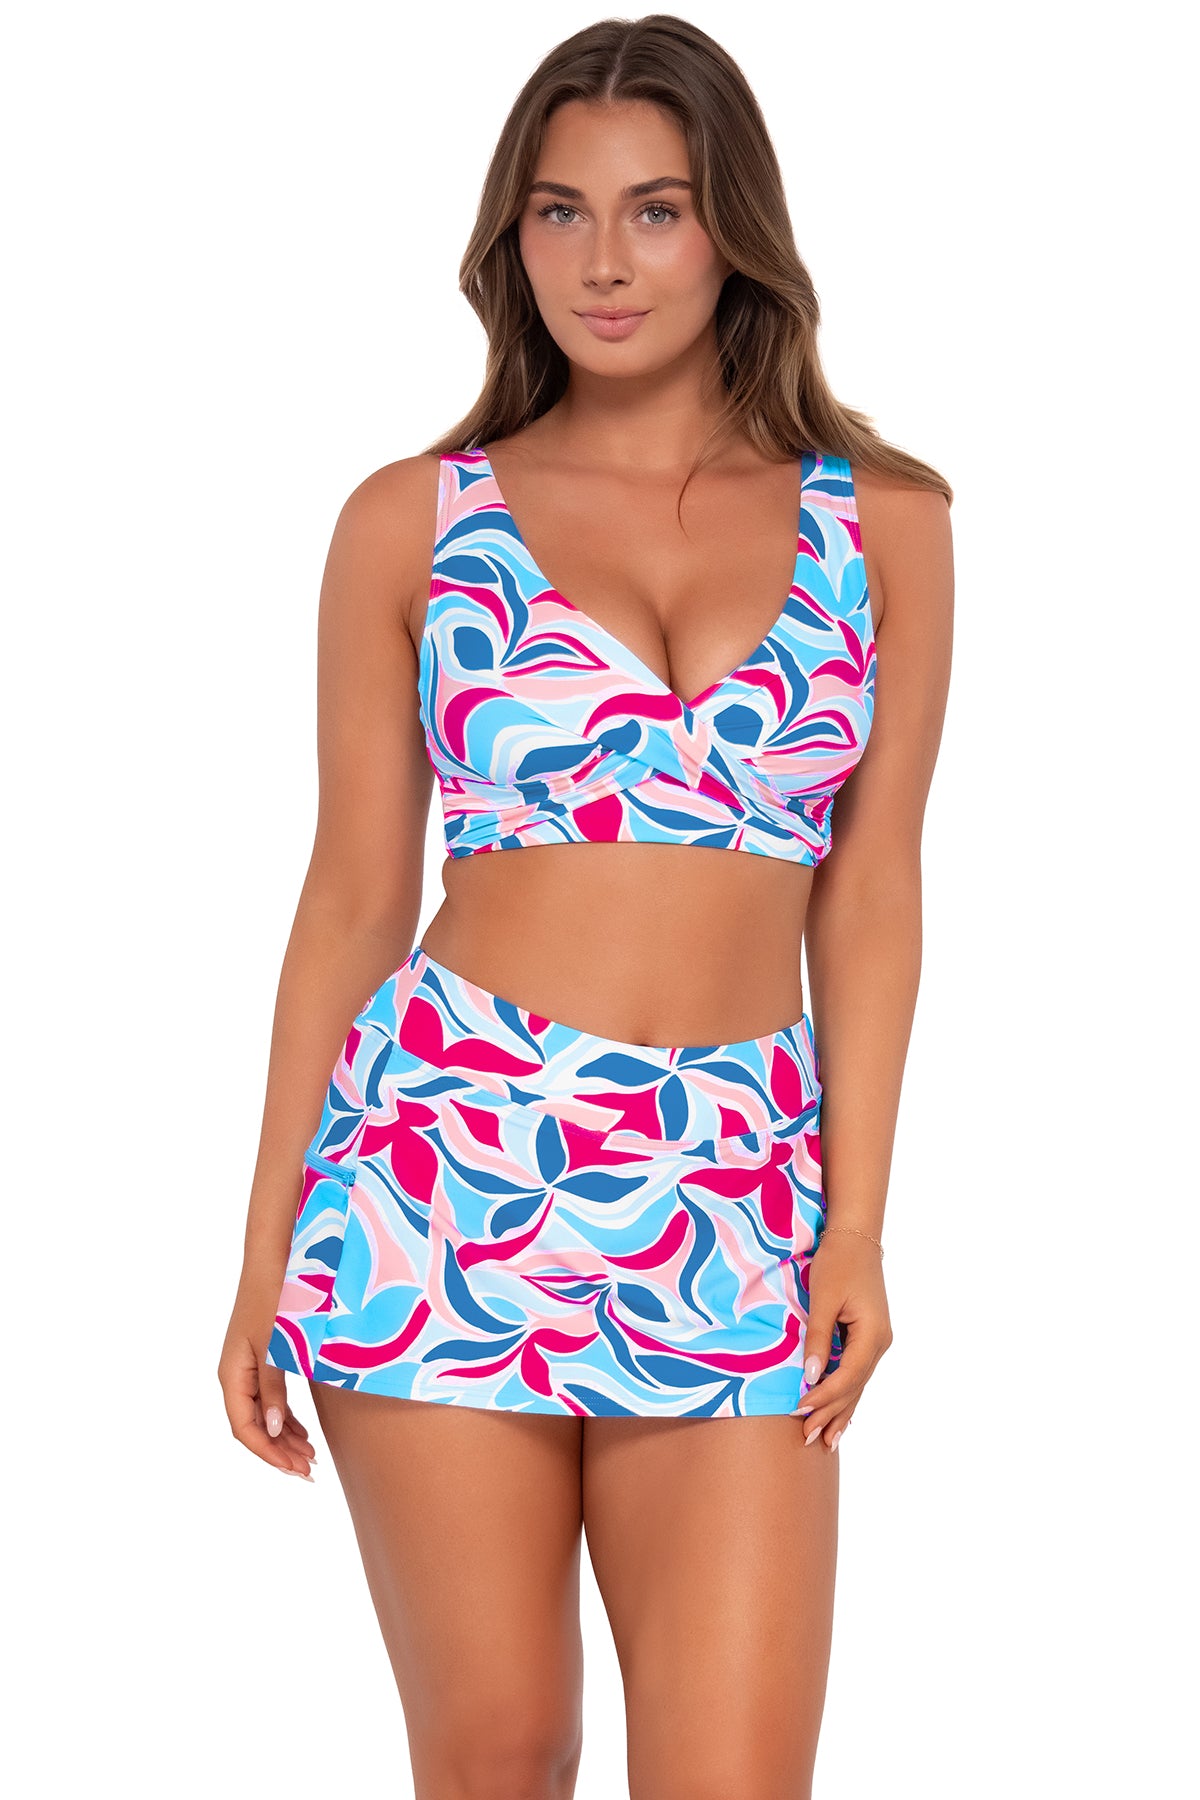 Front pose #2 of Taylor wearing Sunsets Making Waves Sporty Swim Skirt with matching Elsie Top bikini bralette